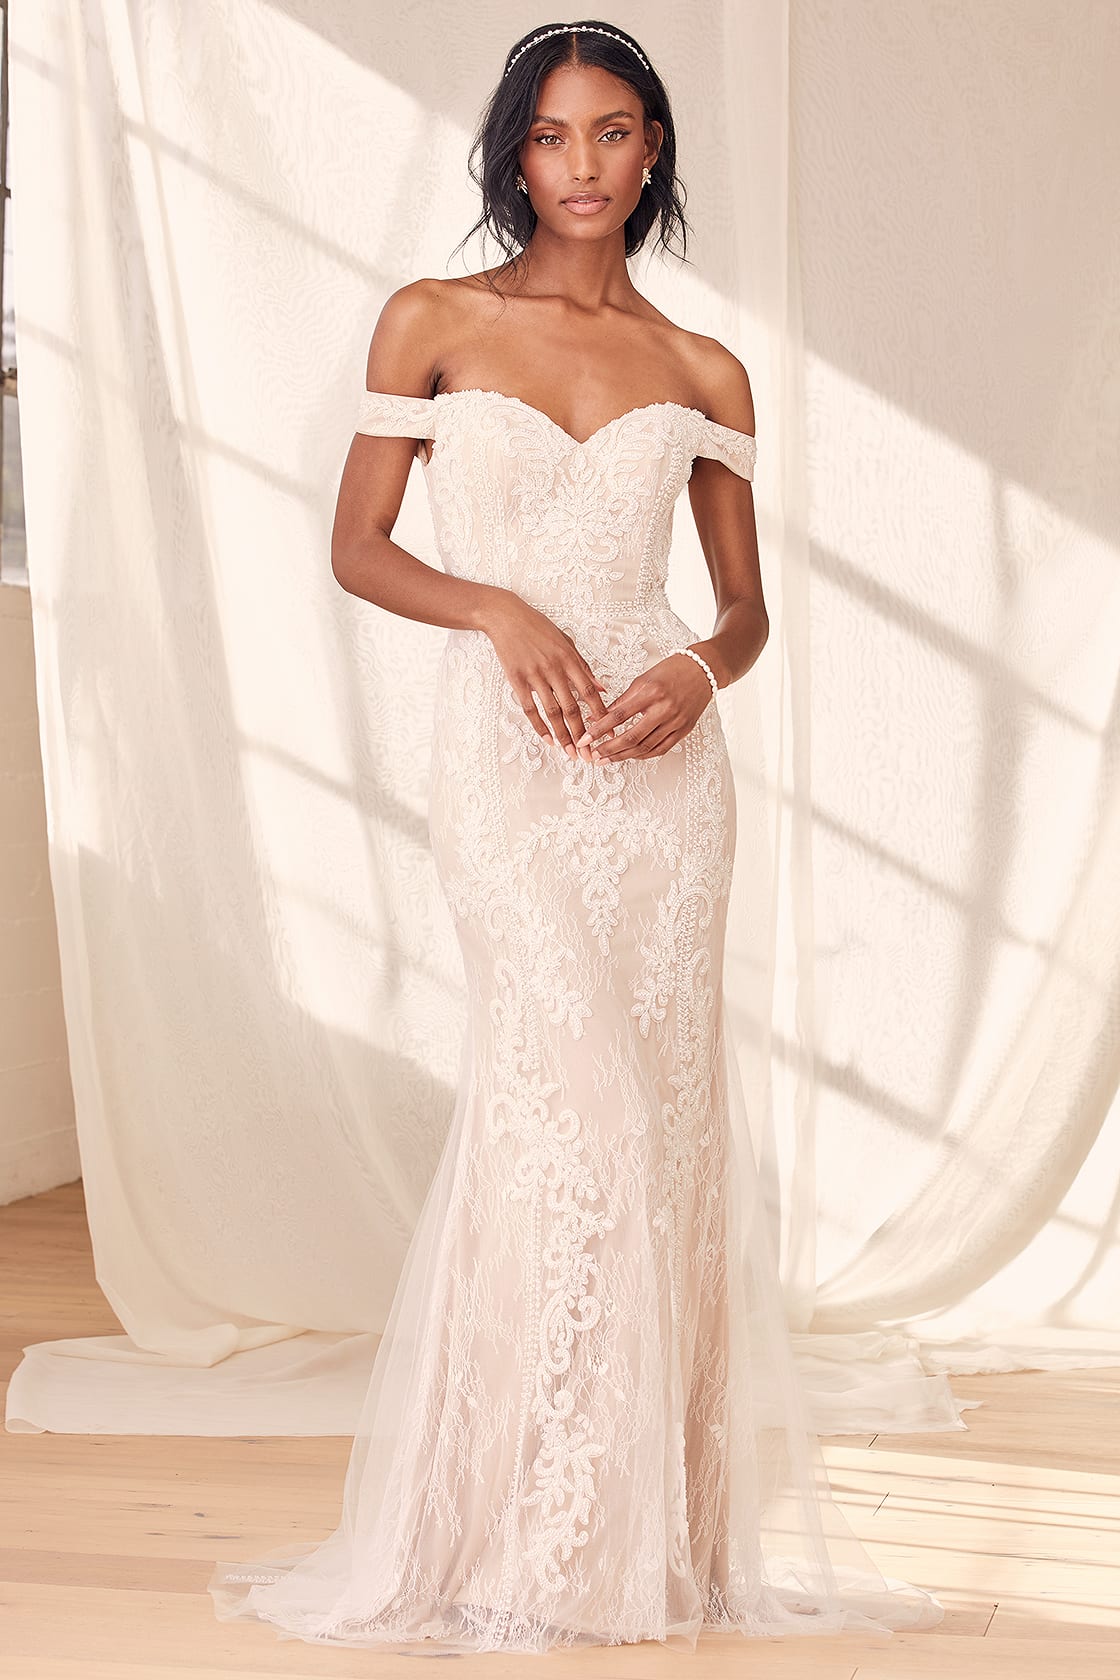 Gorgeous and Affordable Wedding Dresses Under $500 - Dress for the Wedding